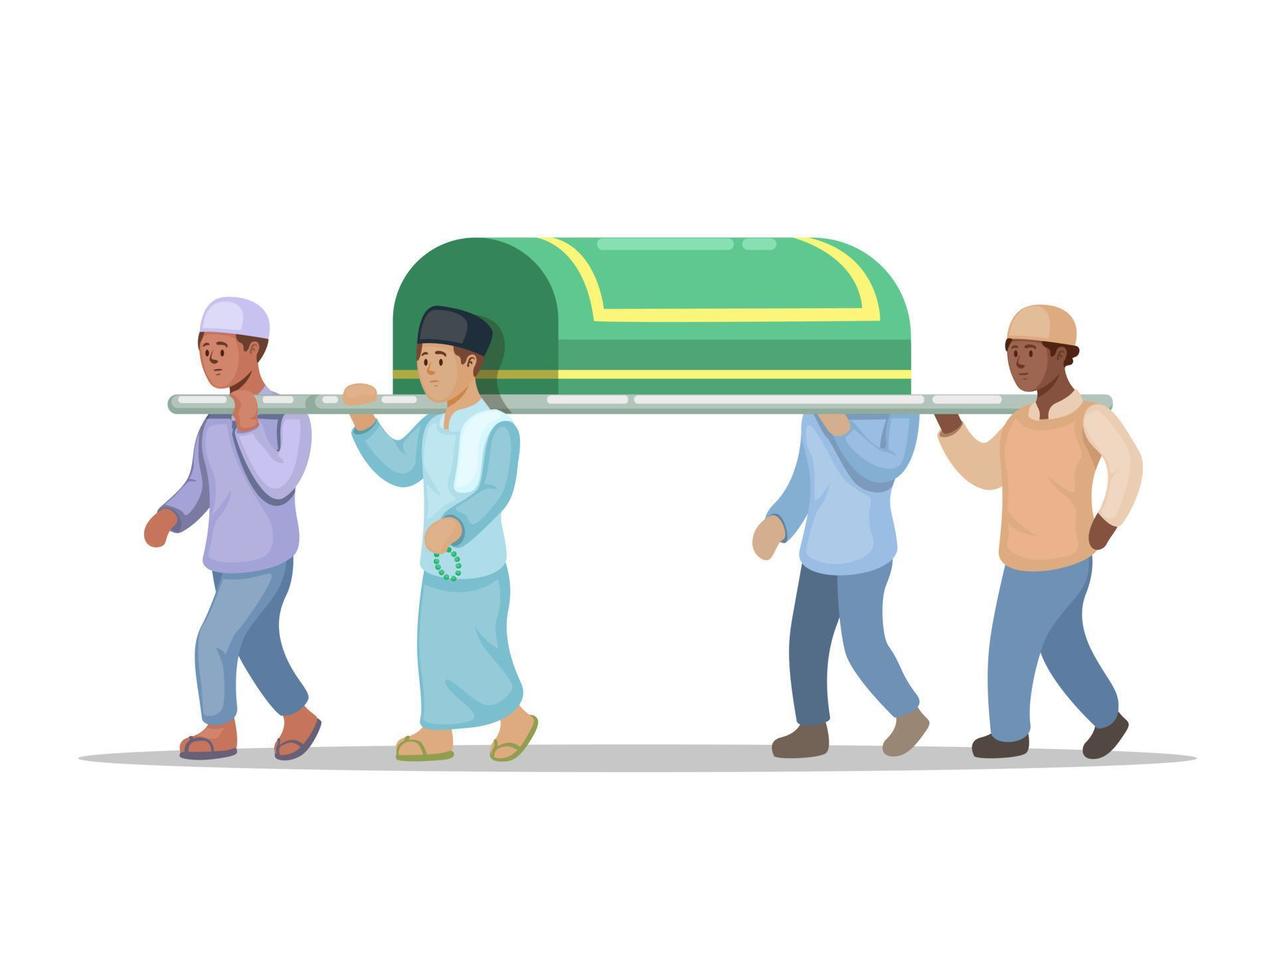 muslim funeral, pallbearer carrying coffin to cemetry in islam religion cartoon illustration vector